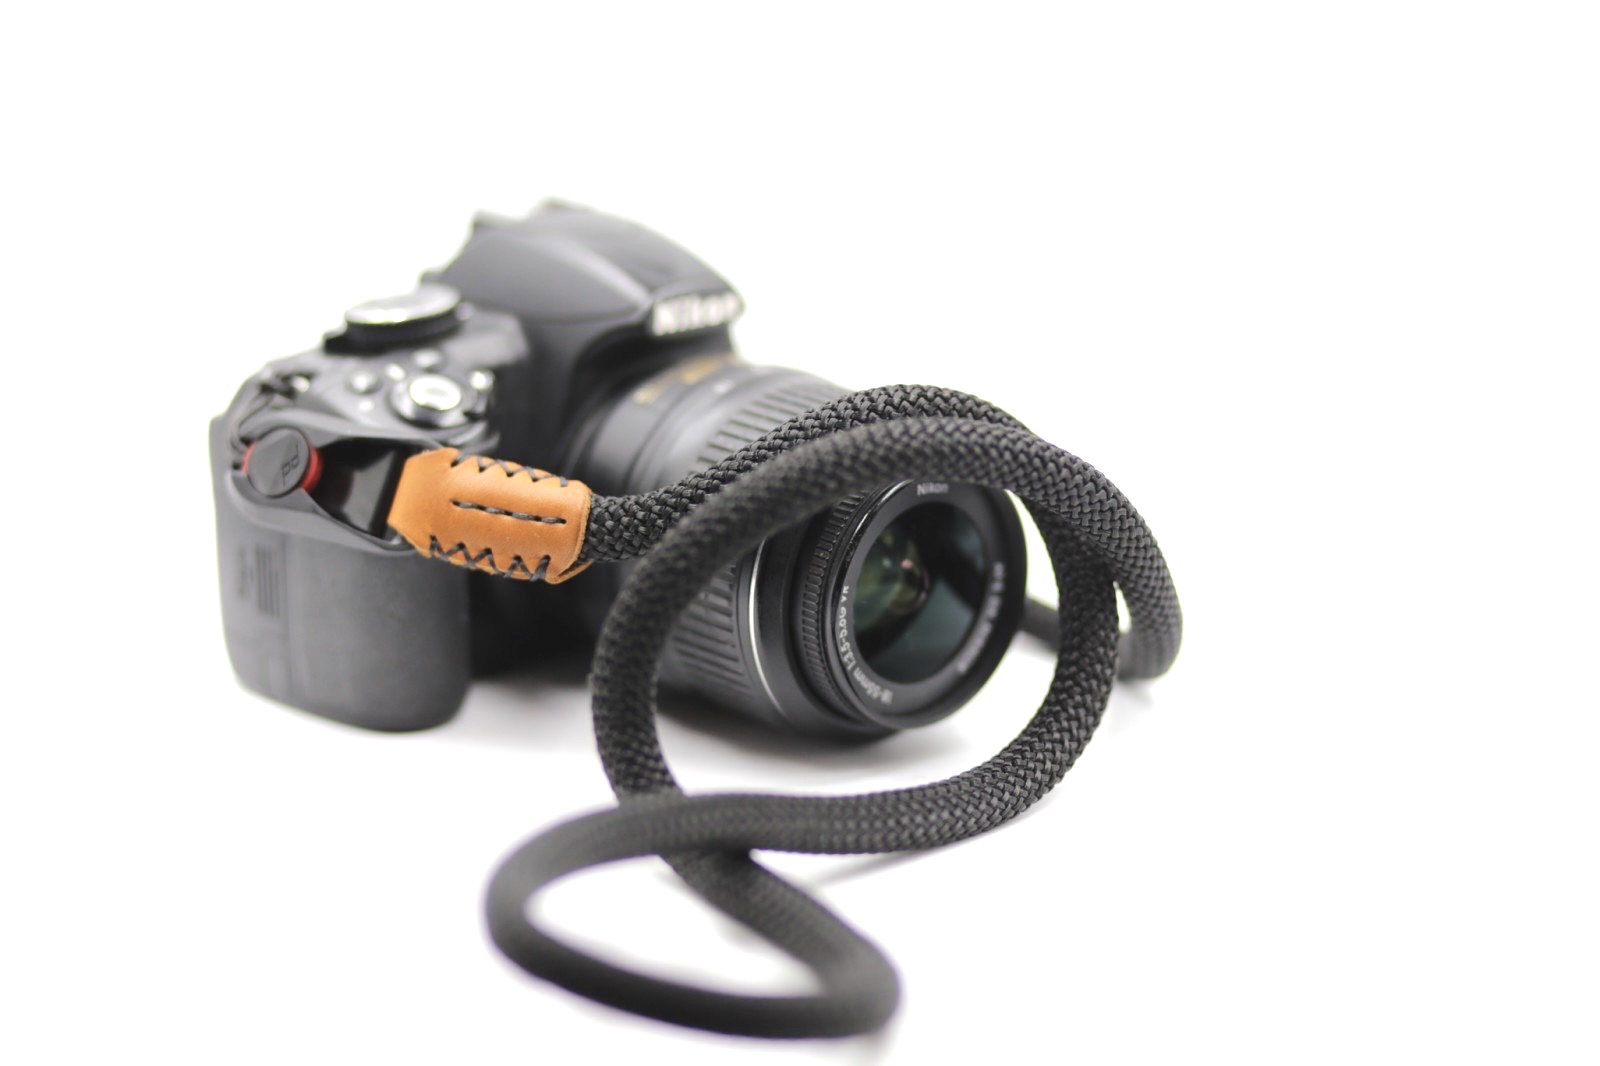 TorMake Hand strap wrist strap from rope and Anchor Links Peak Design decorate leather and color thread for all Film,Digital,Mirrorless Camera Strap 